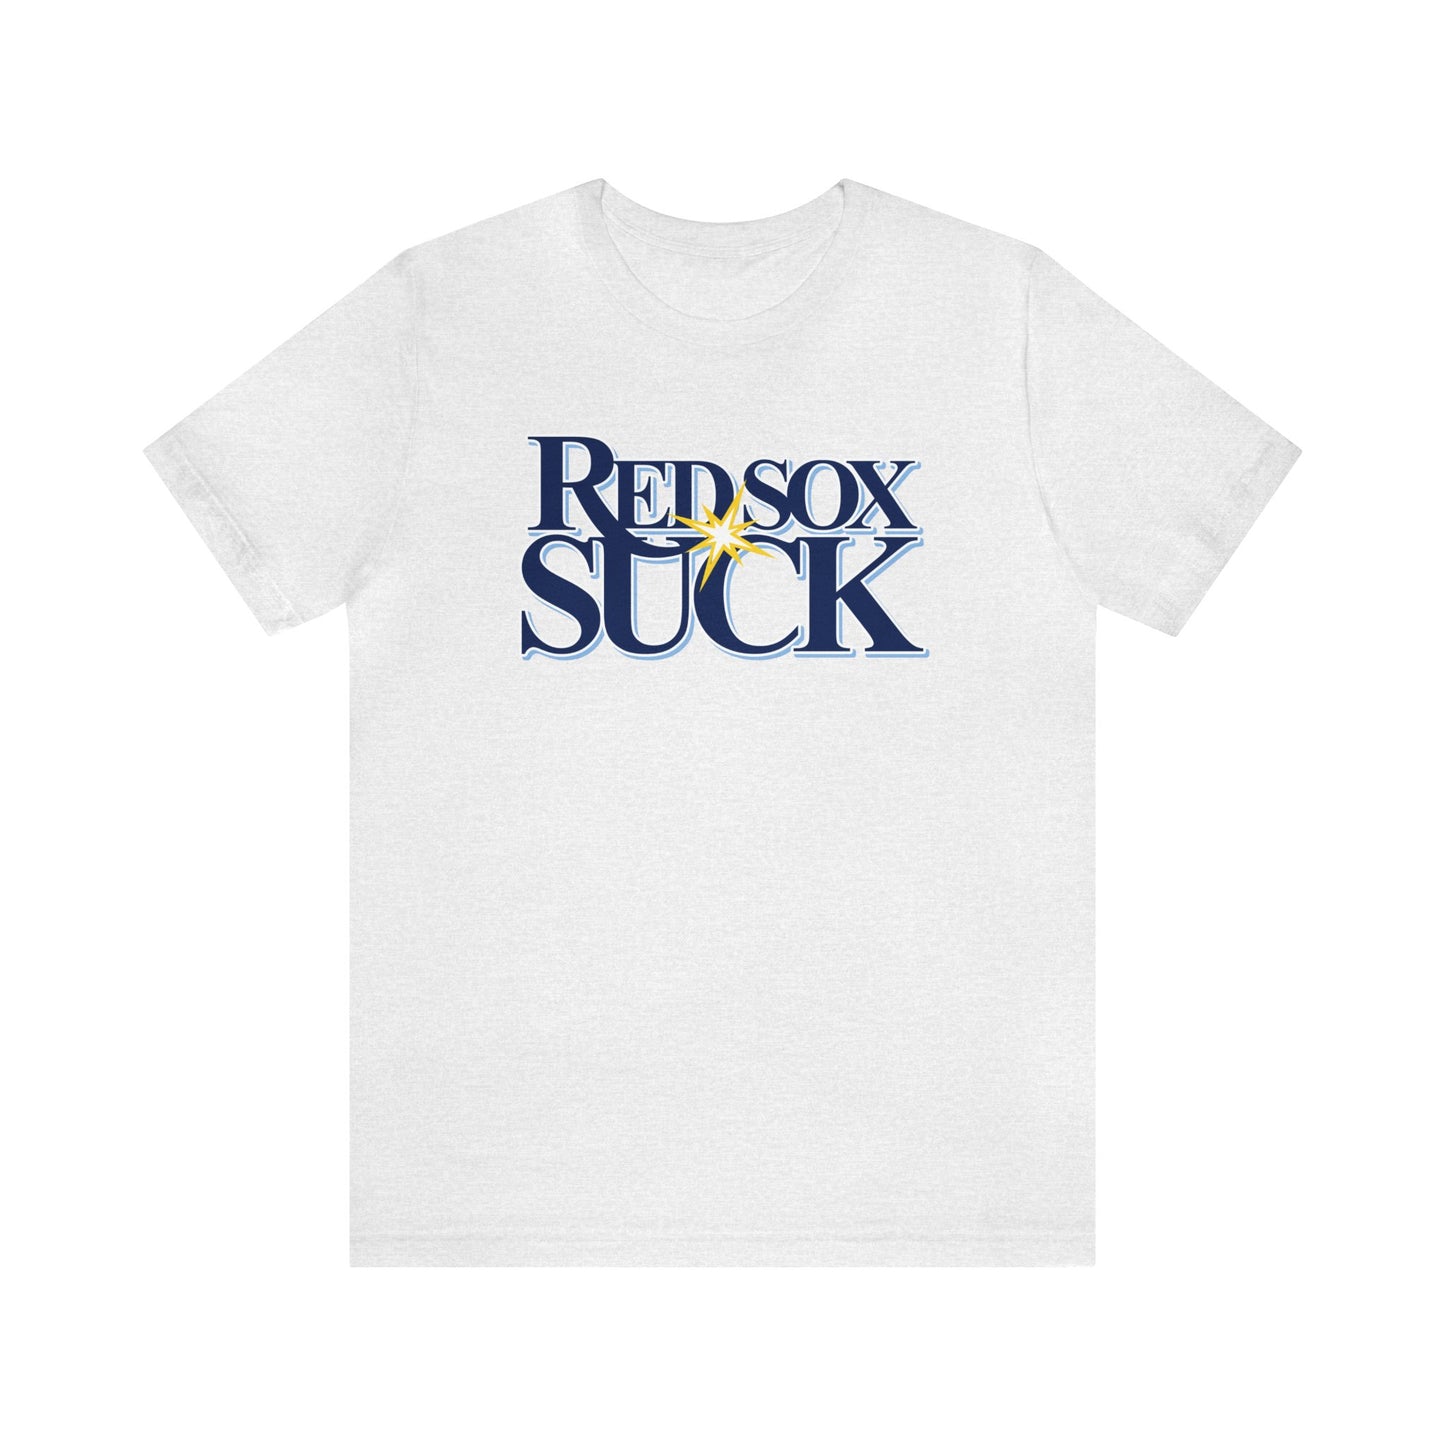 The BoSox Suck (for Tampa Rays fans) - Unisex Jersey Short Sleeve Tee